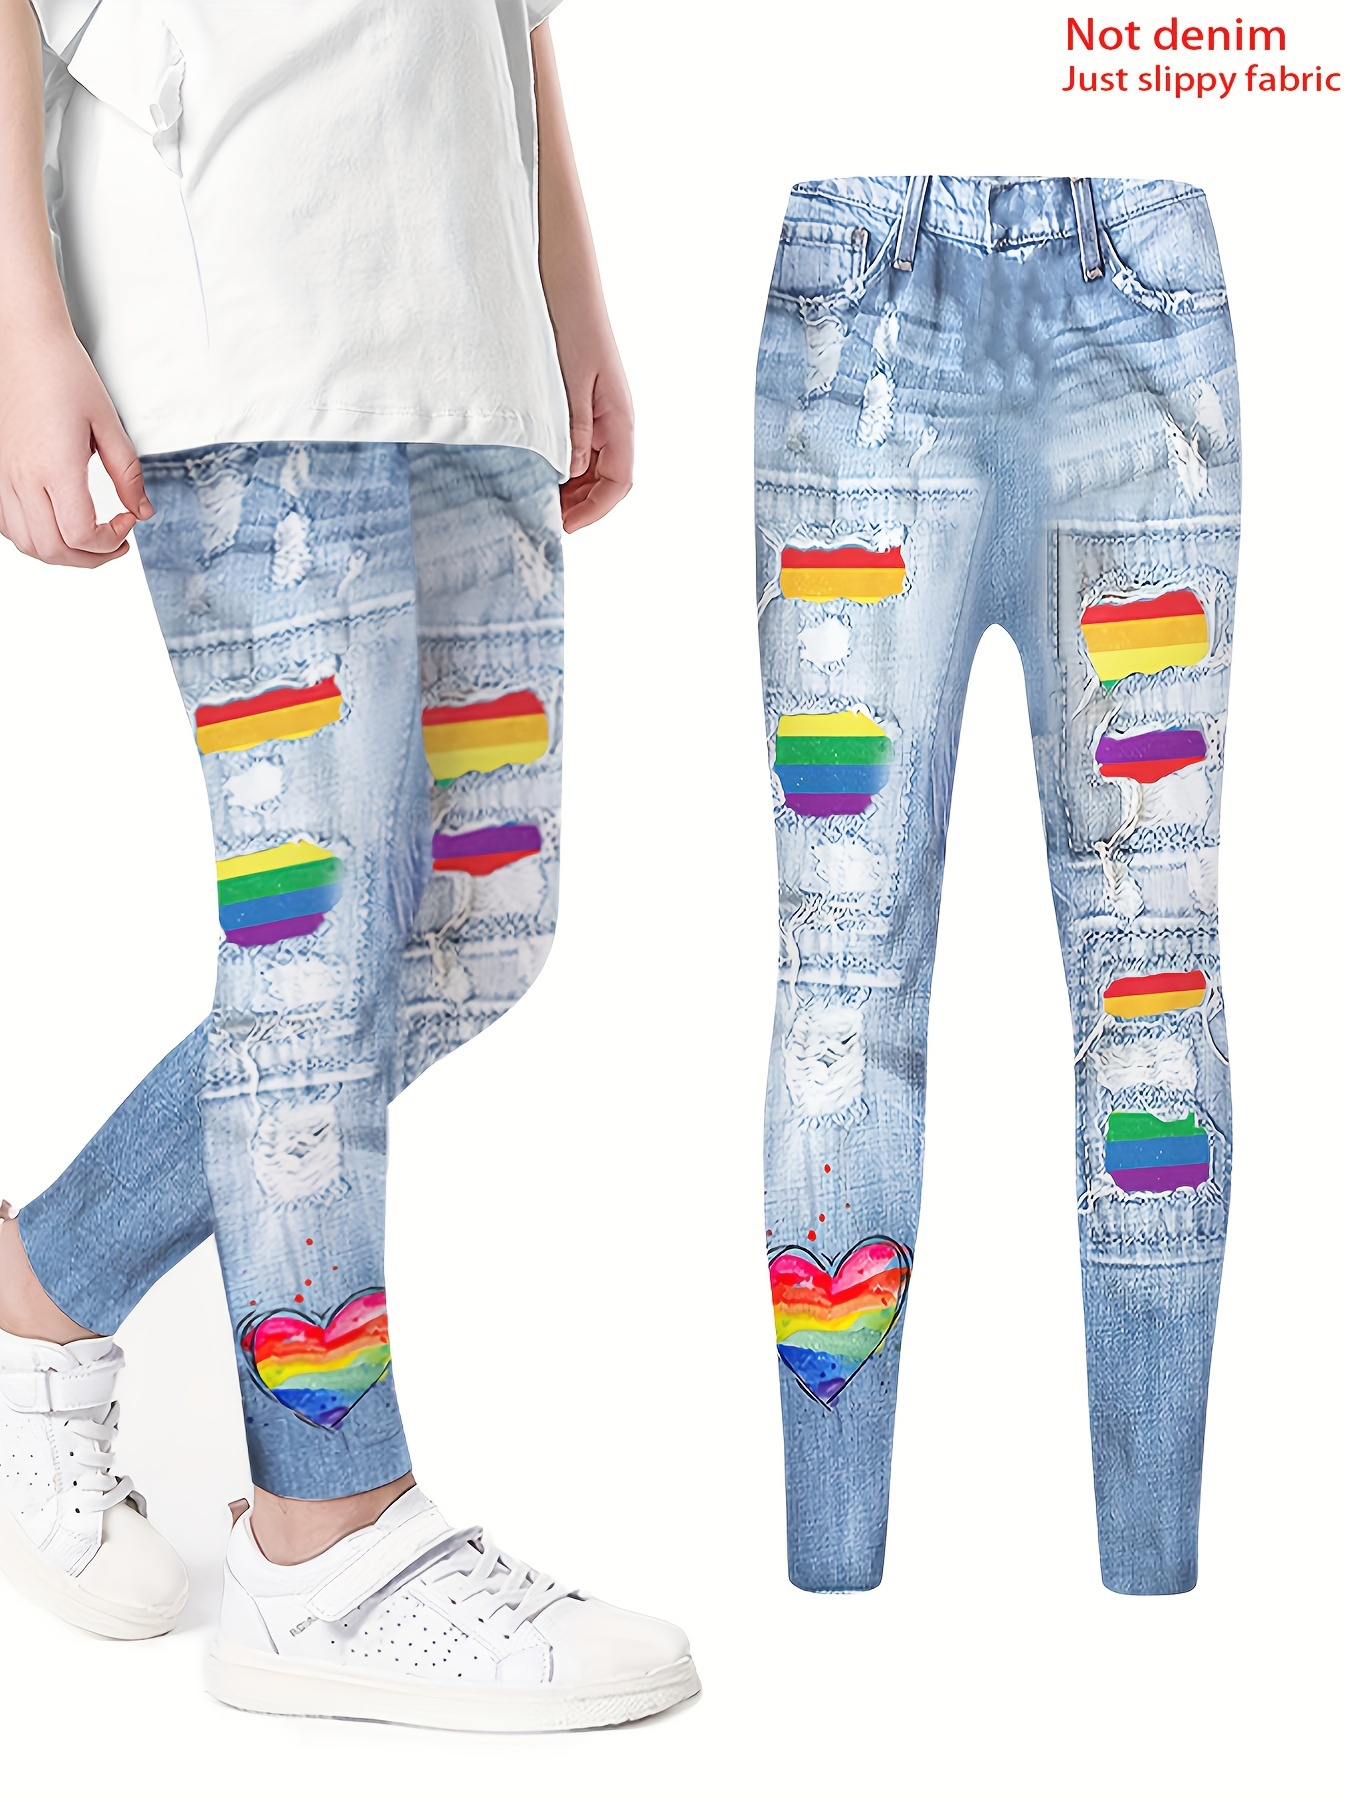 Ripped Rainbow Effect Faux Denim print Leggings, Girls Comfy & Breathable  Pants Kids Clothes Gift Halloween